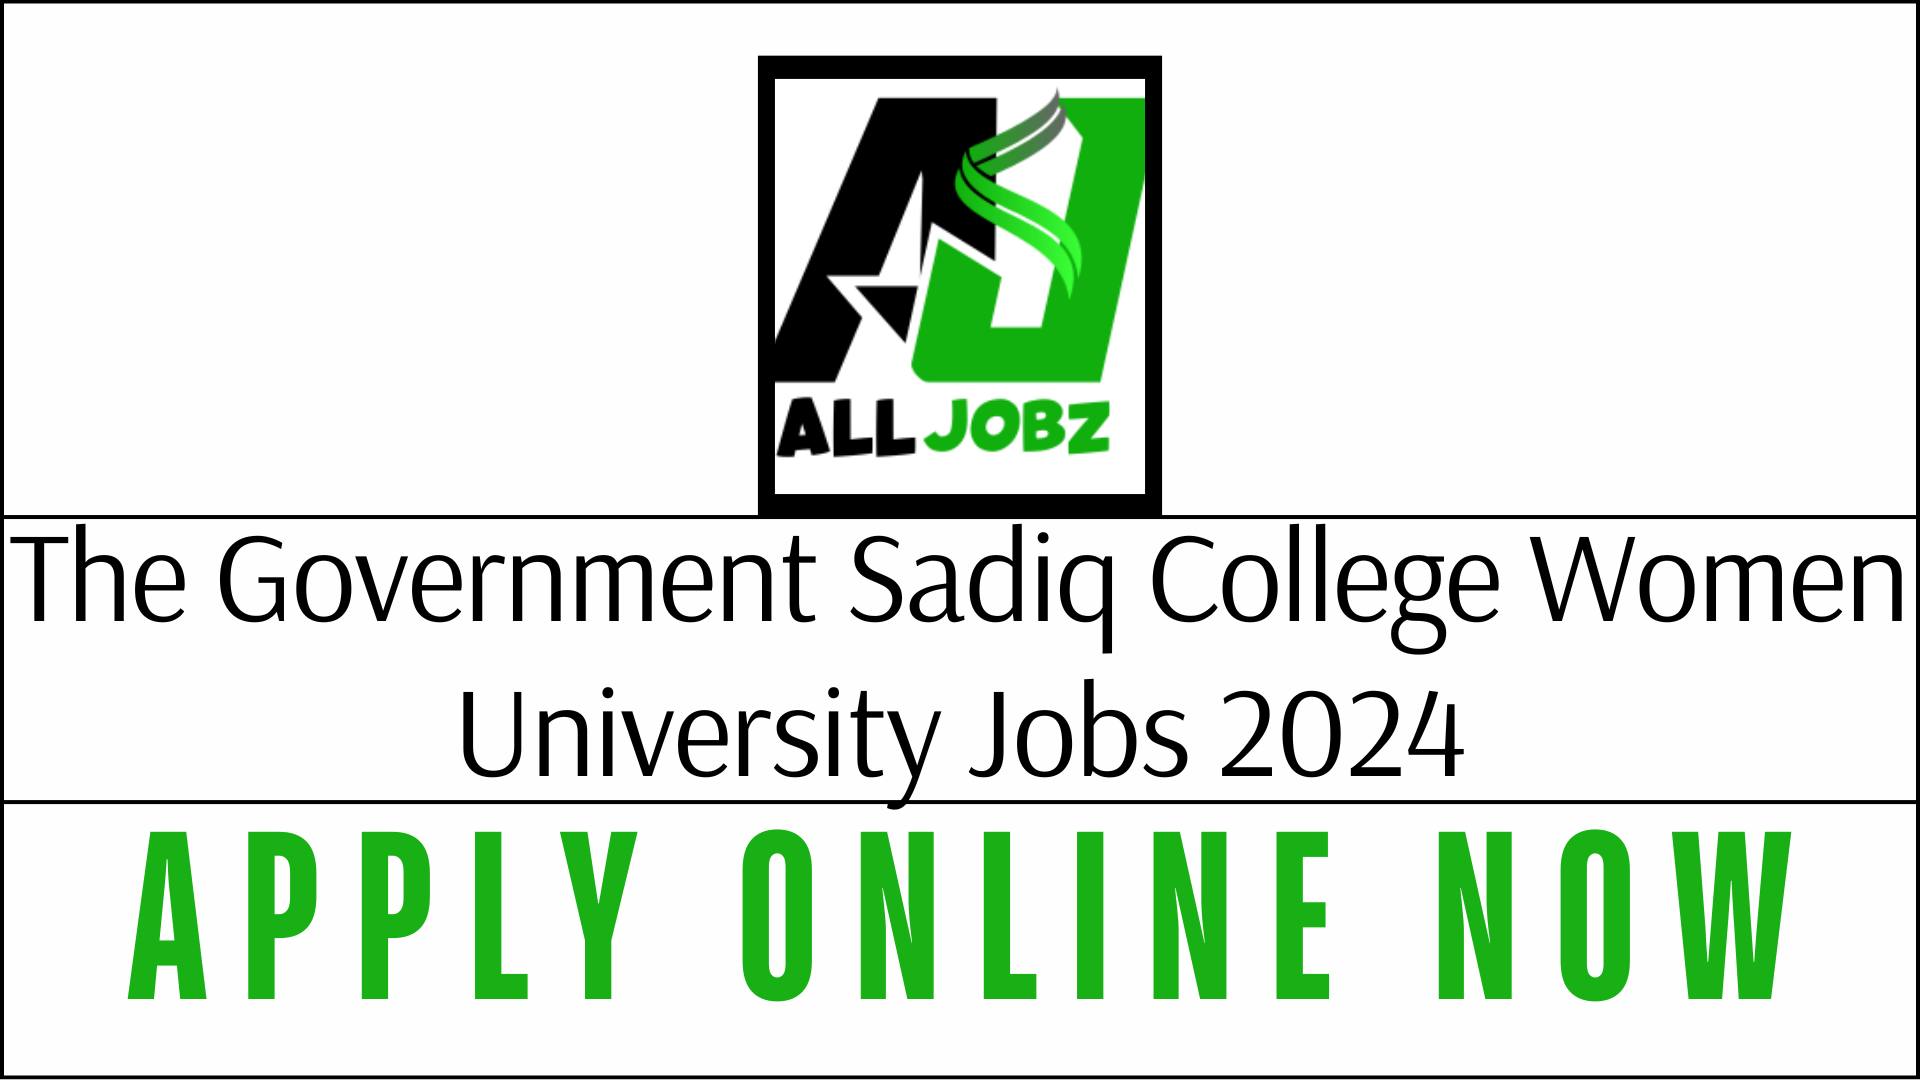 The Government Sadiq College Women University Jobs 2024 For Personal Assistant, Security Officer, Assistant, Accountant, Hostel Warden, Sports Supervisor, Care Taker, Sanitary Inspector, Junior Clerk, Lab Assistant, Sub Engineer, Security Supervisor, Library Assistant, Network Support Assistant, Driver, Carpenter, Junior Lab Assistant, Naib Qasid, Mali, Sweeper, Computer Operator, Lab Attendant, Aya, Naib Qasid, The Government Sadiq College Women University Bahawalpur Job Openings 2024, The Government Sadiq College Women University Bahawalpur Job Openings 2024 Online, The Government Sadiq College Women University Bahawalpur Job Openings 2024 Merit, The Government Sadiq College Women University Bahawalpur Job Openings 2024 Last,